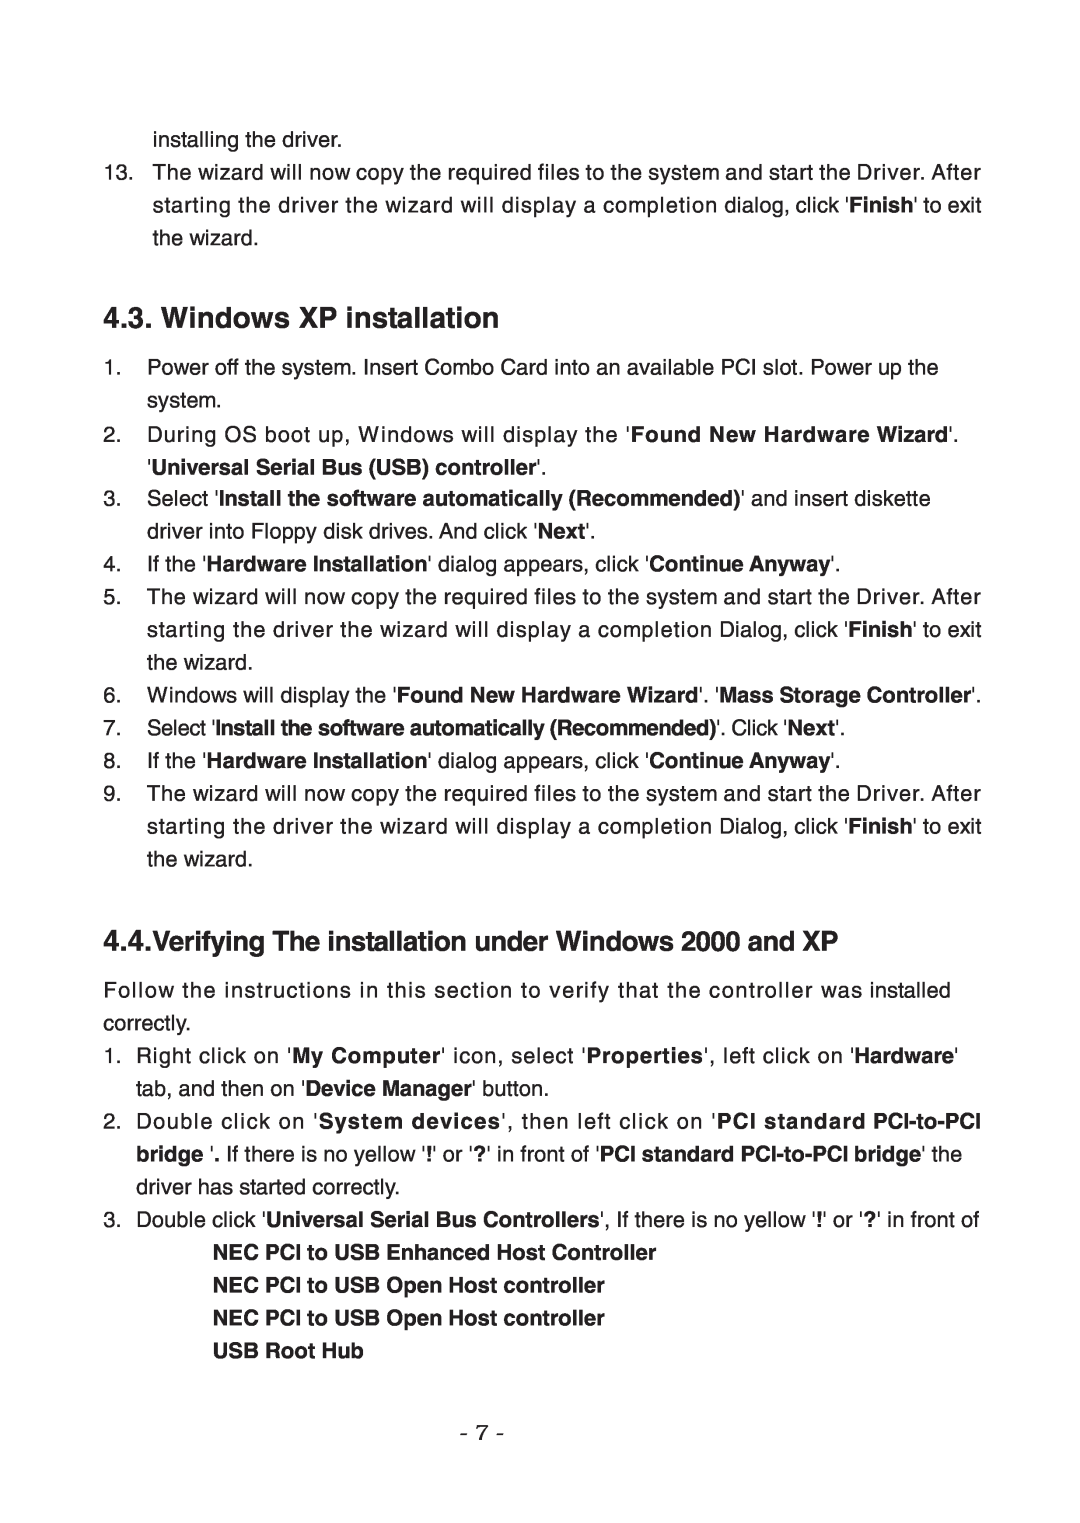 Lindy 70536 user manual Windows XP installation, If the Hardware Installation dialog appears, click Continue Anyway 